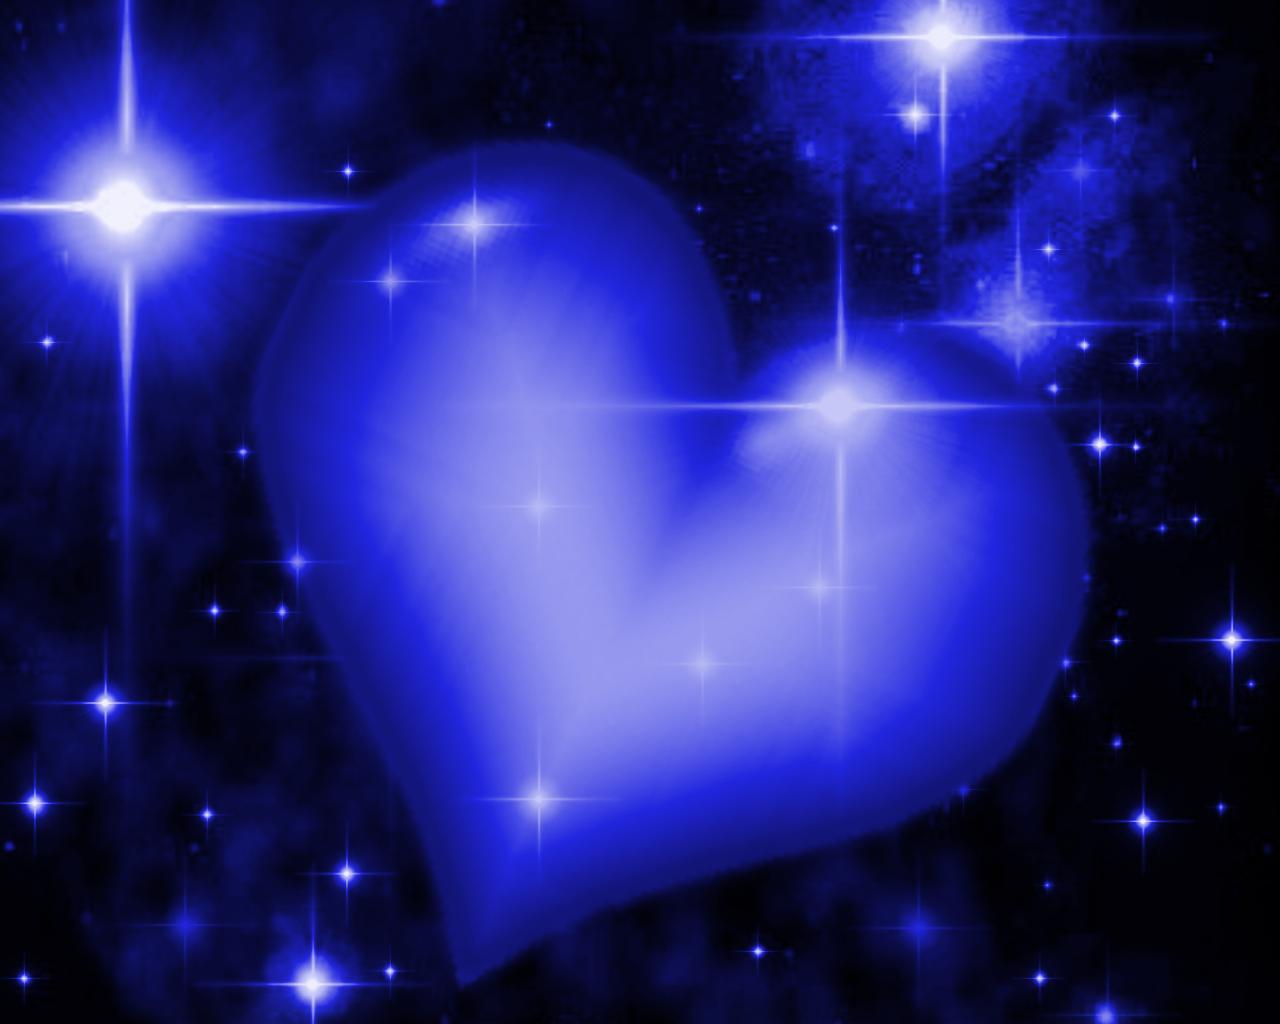 Background Wallpaper Image Royal Blue Heart With Starry